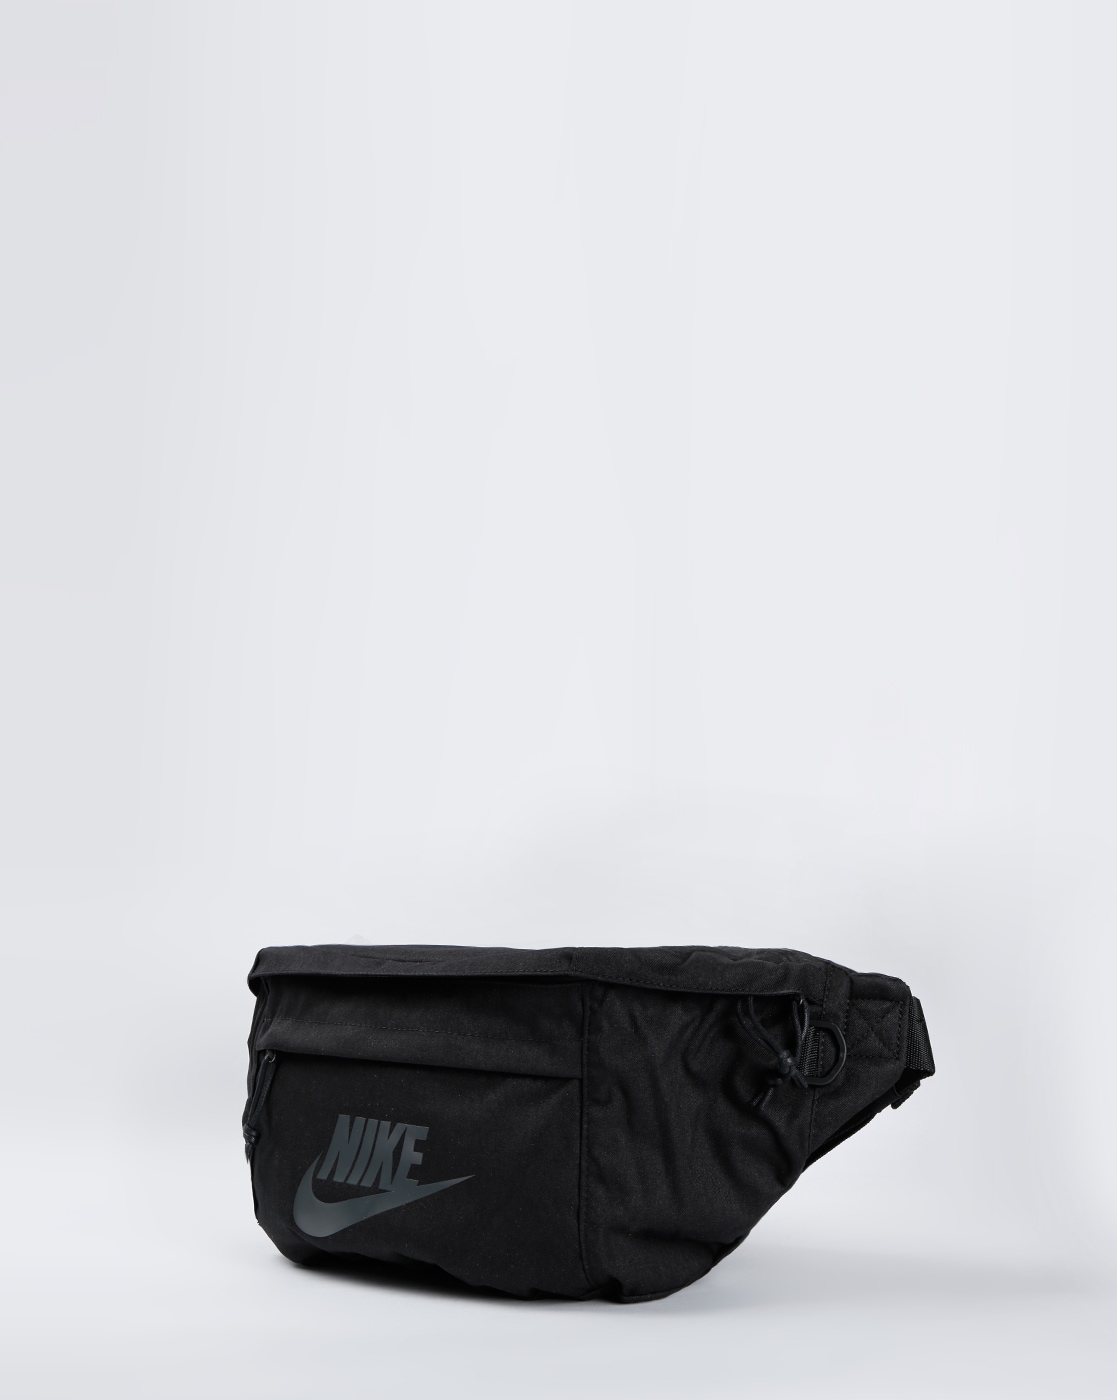 Nike Mens Waist Bags  Bags  Stylicy India